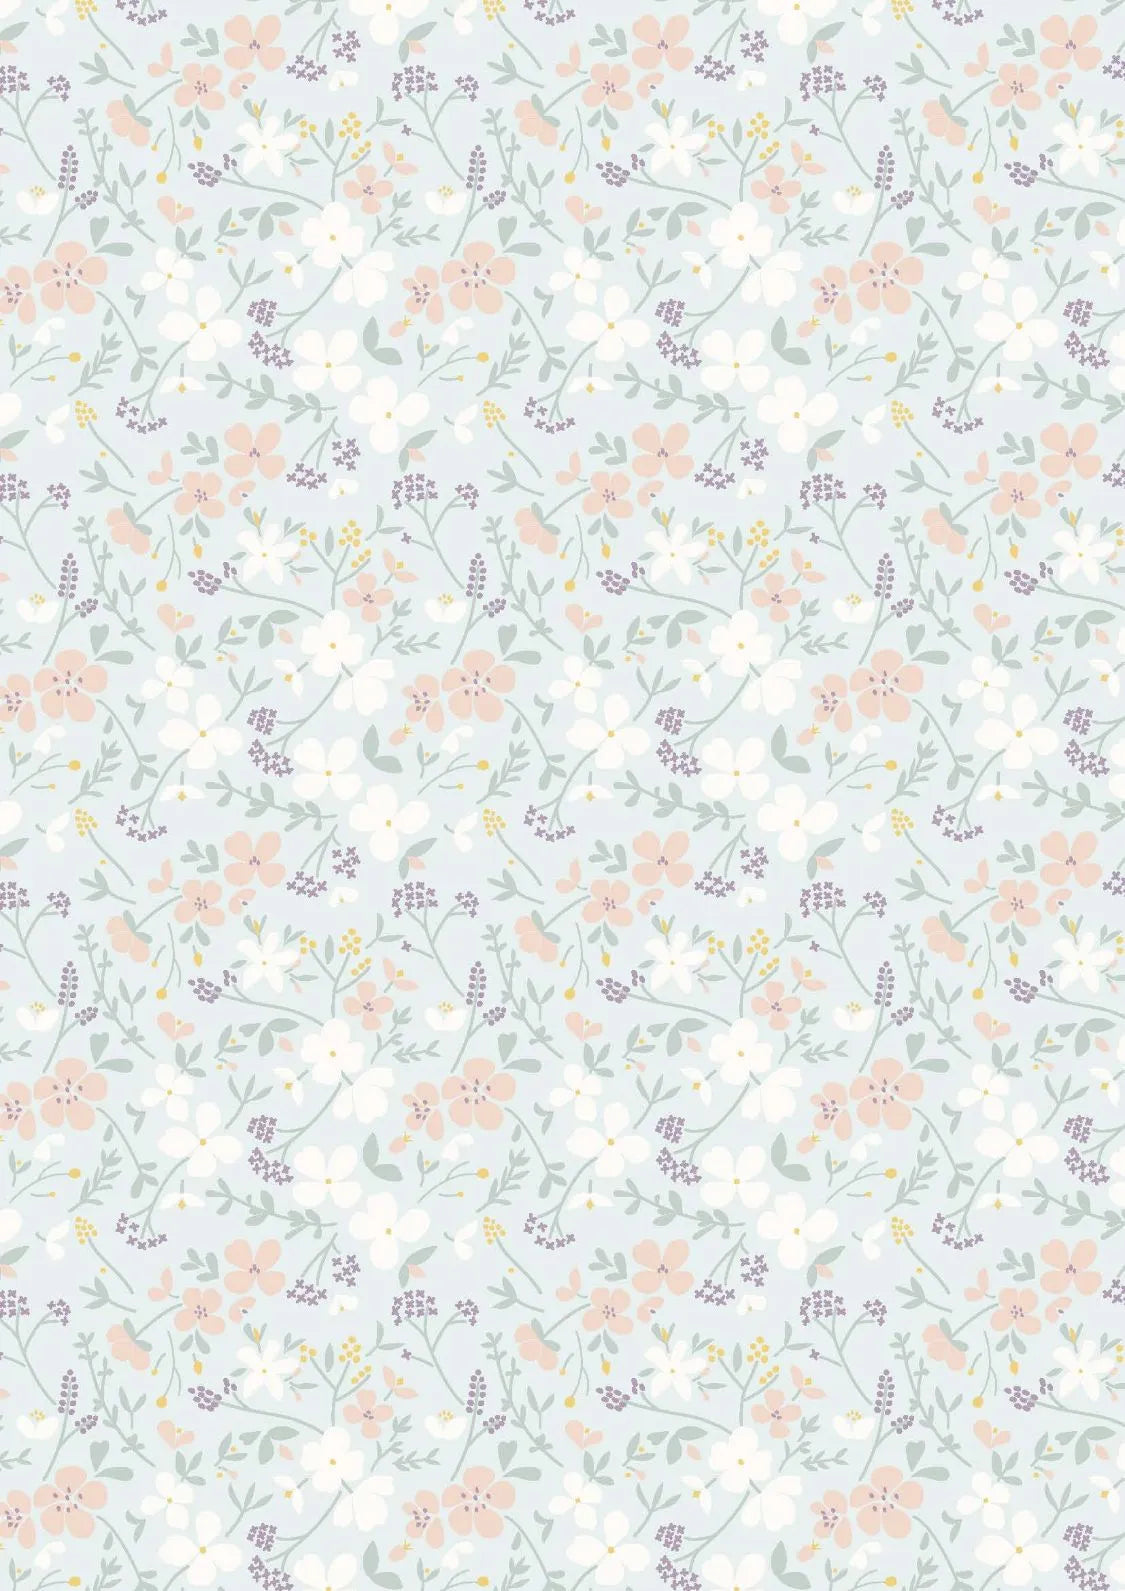 Pastel flowers on a duck egg blue cotton fabric - Heart of Summer by Lewis and Irene